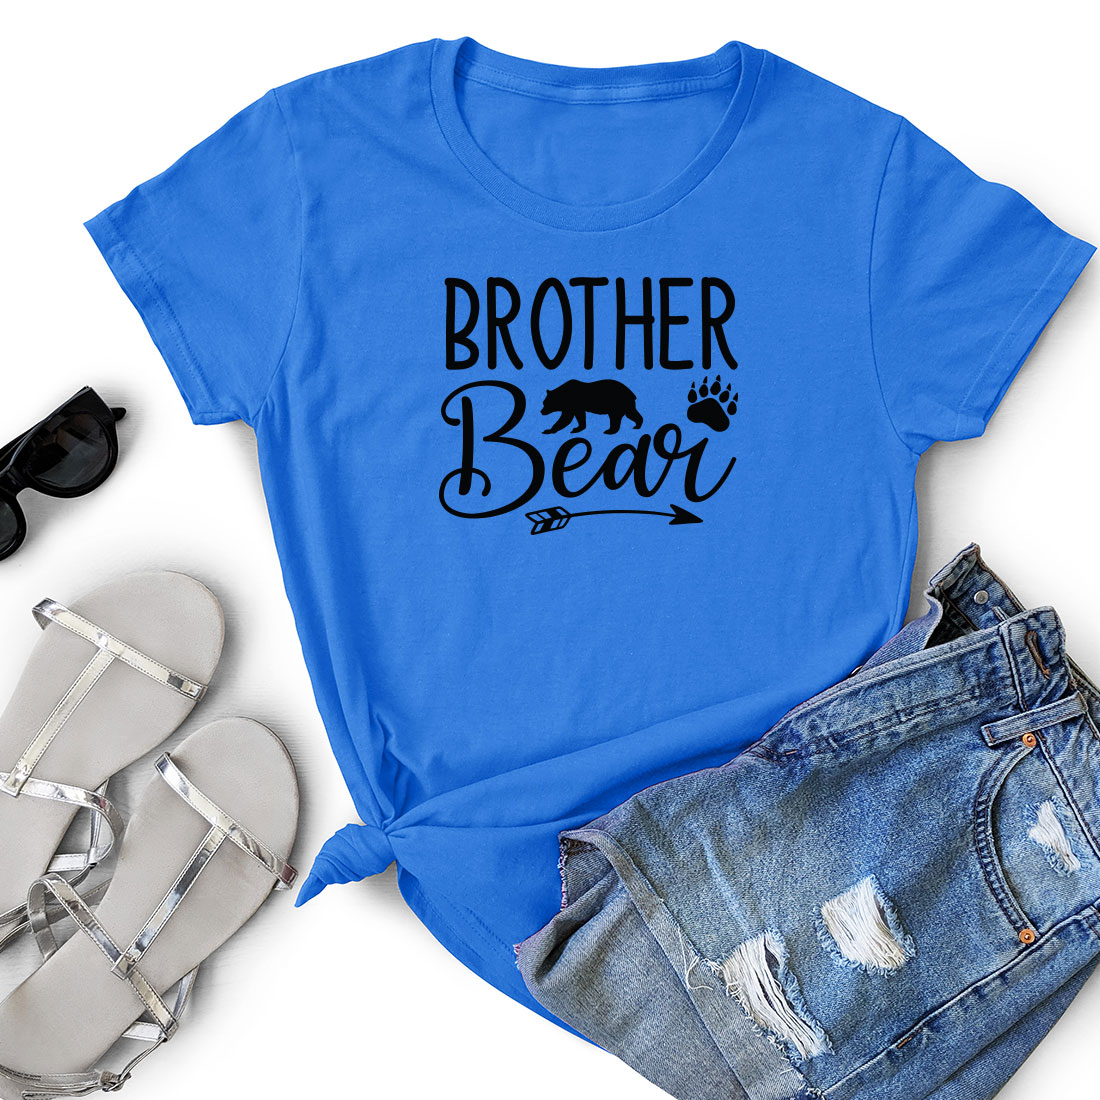 Blue shirt that says brother bear next to a pair of shorts.